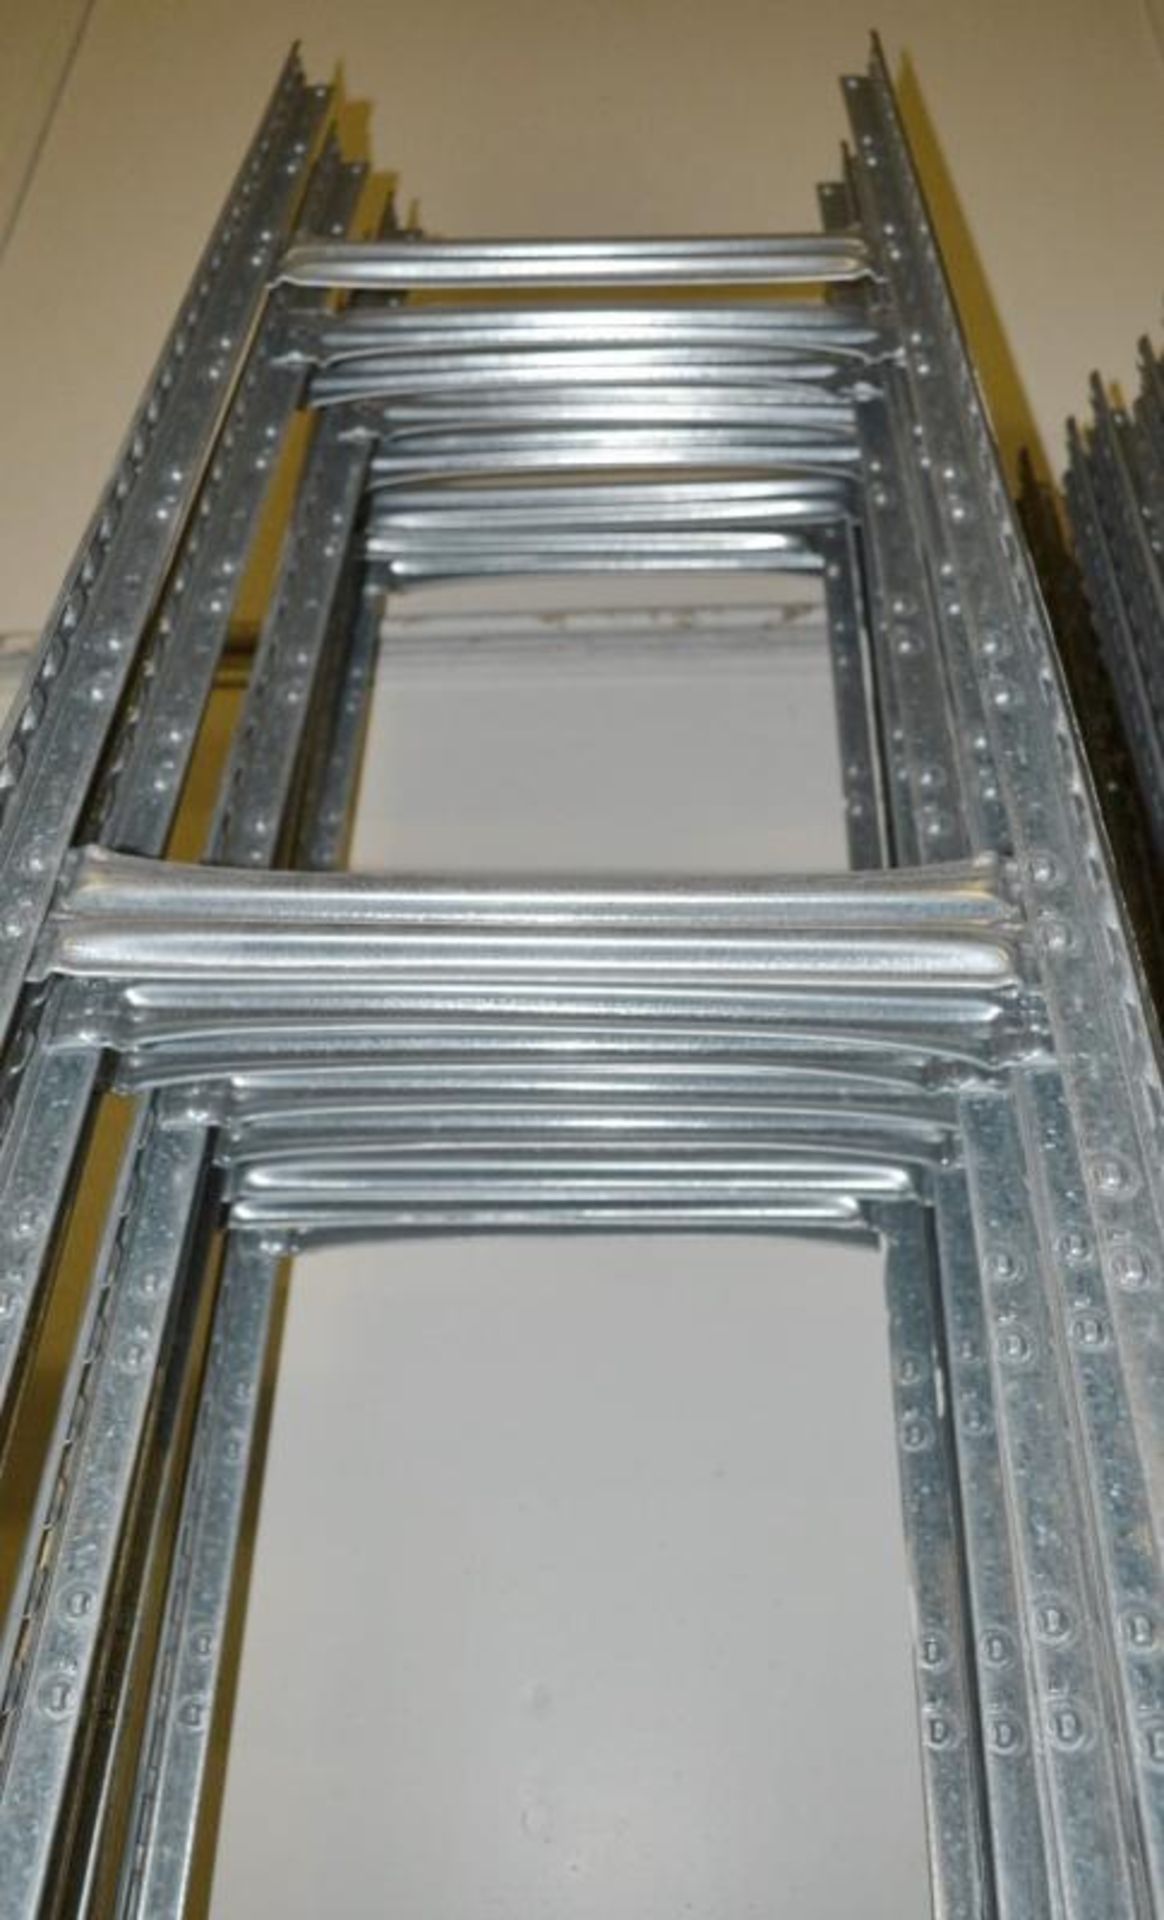 9 x Bays of Metalsistem Steel Modular Storage Shelving - Includes 29 Pieces - Recently Removed - Image 3 of 16